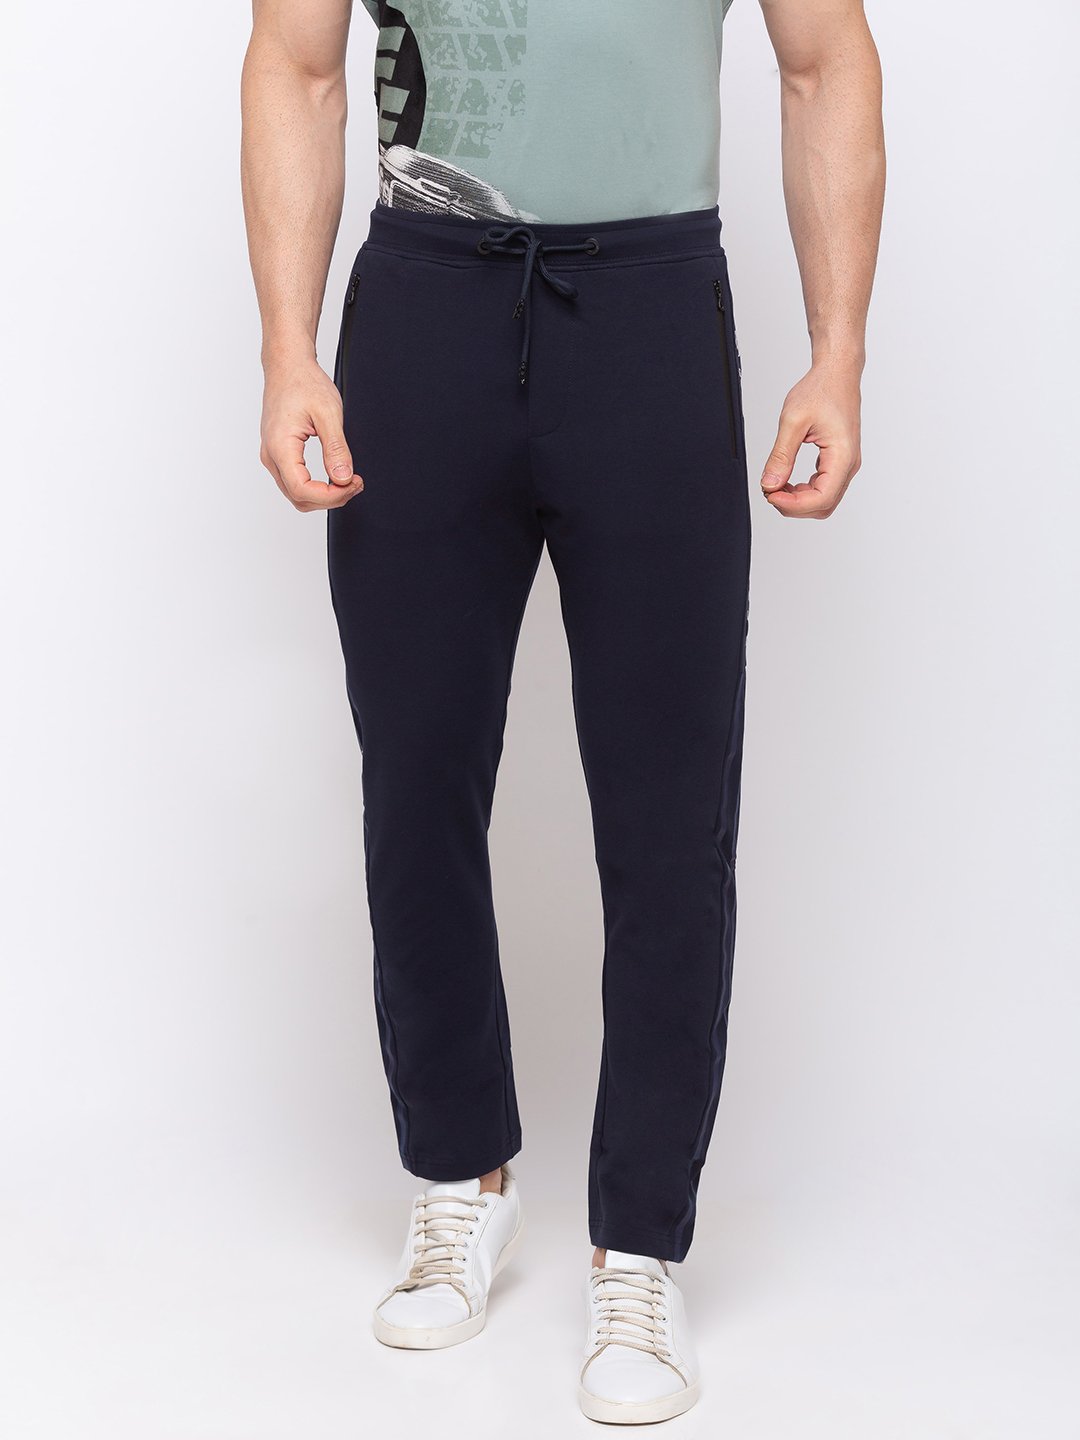 Status Quo |Solid with Printed Panel Regular Fit Trackpant - M, L, XL, XXL